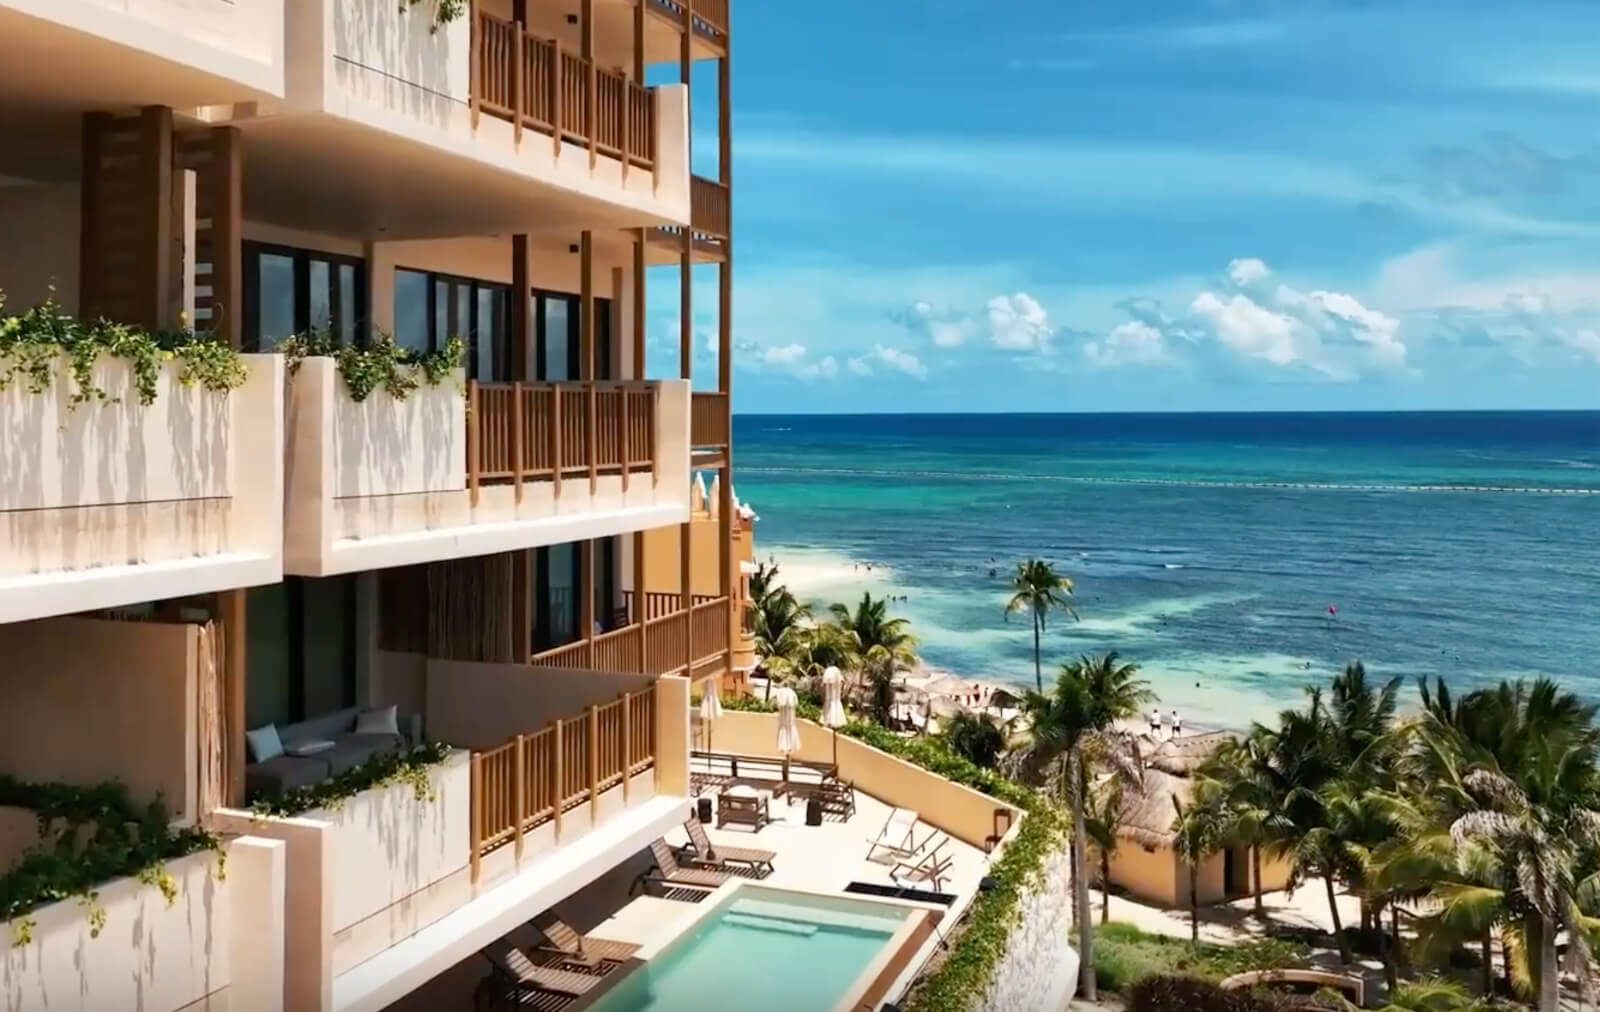 Luxury condo private pool, hotel amenities, beach club and PGA golf course, the most exclusive community of Playa del Carmen.